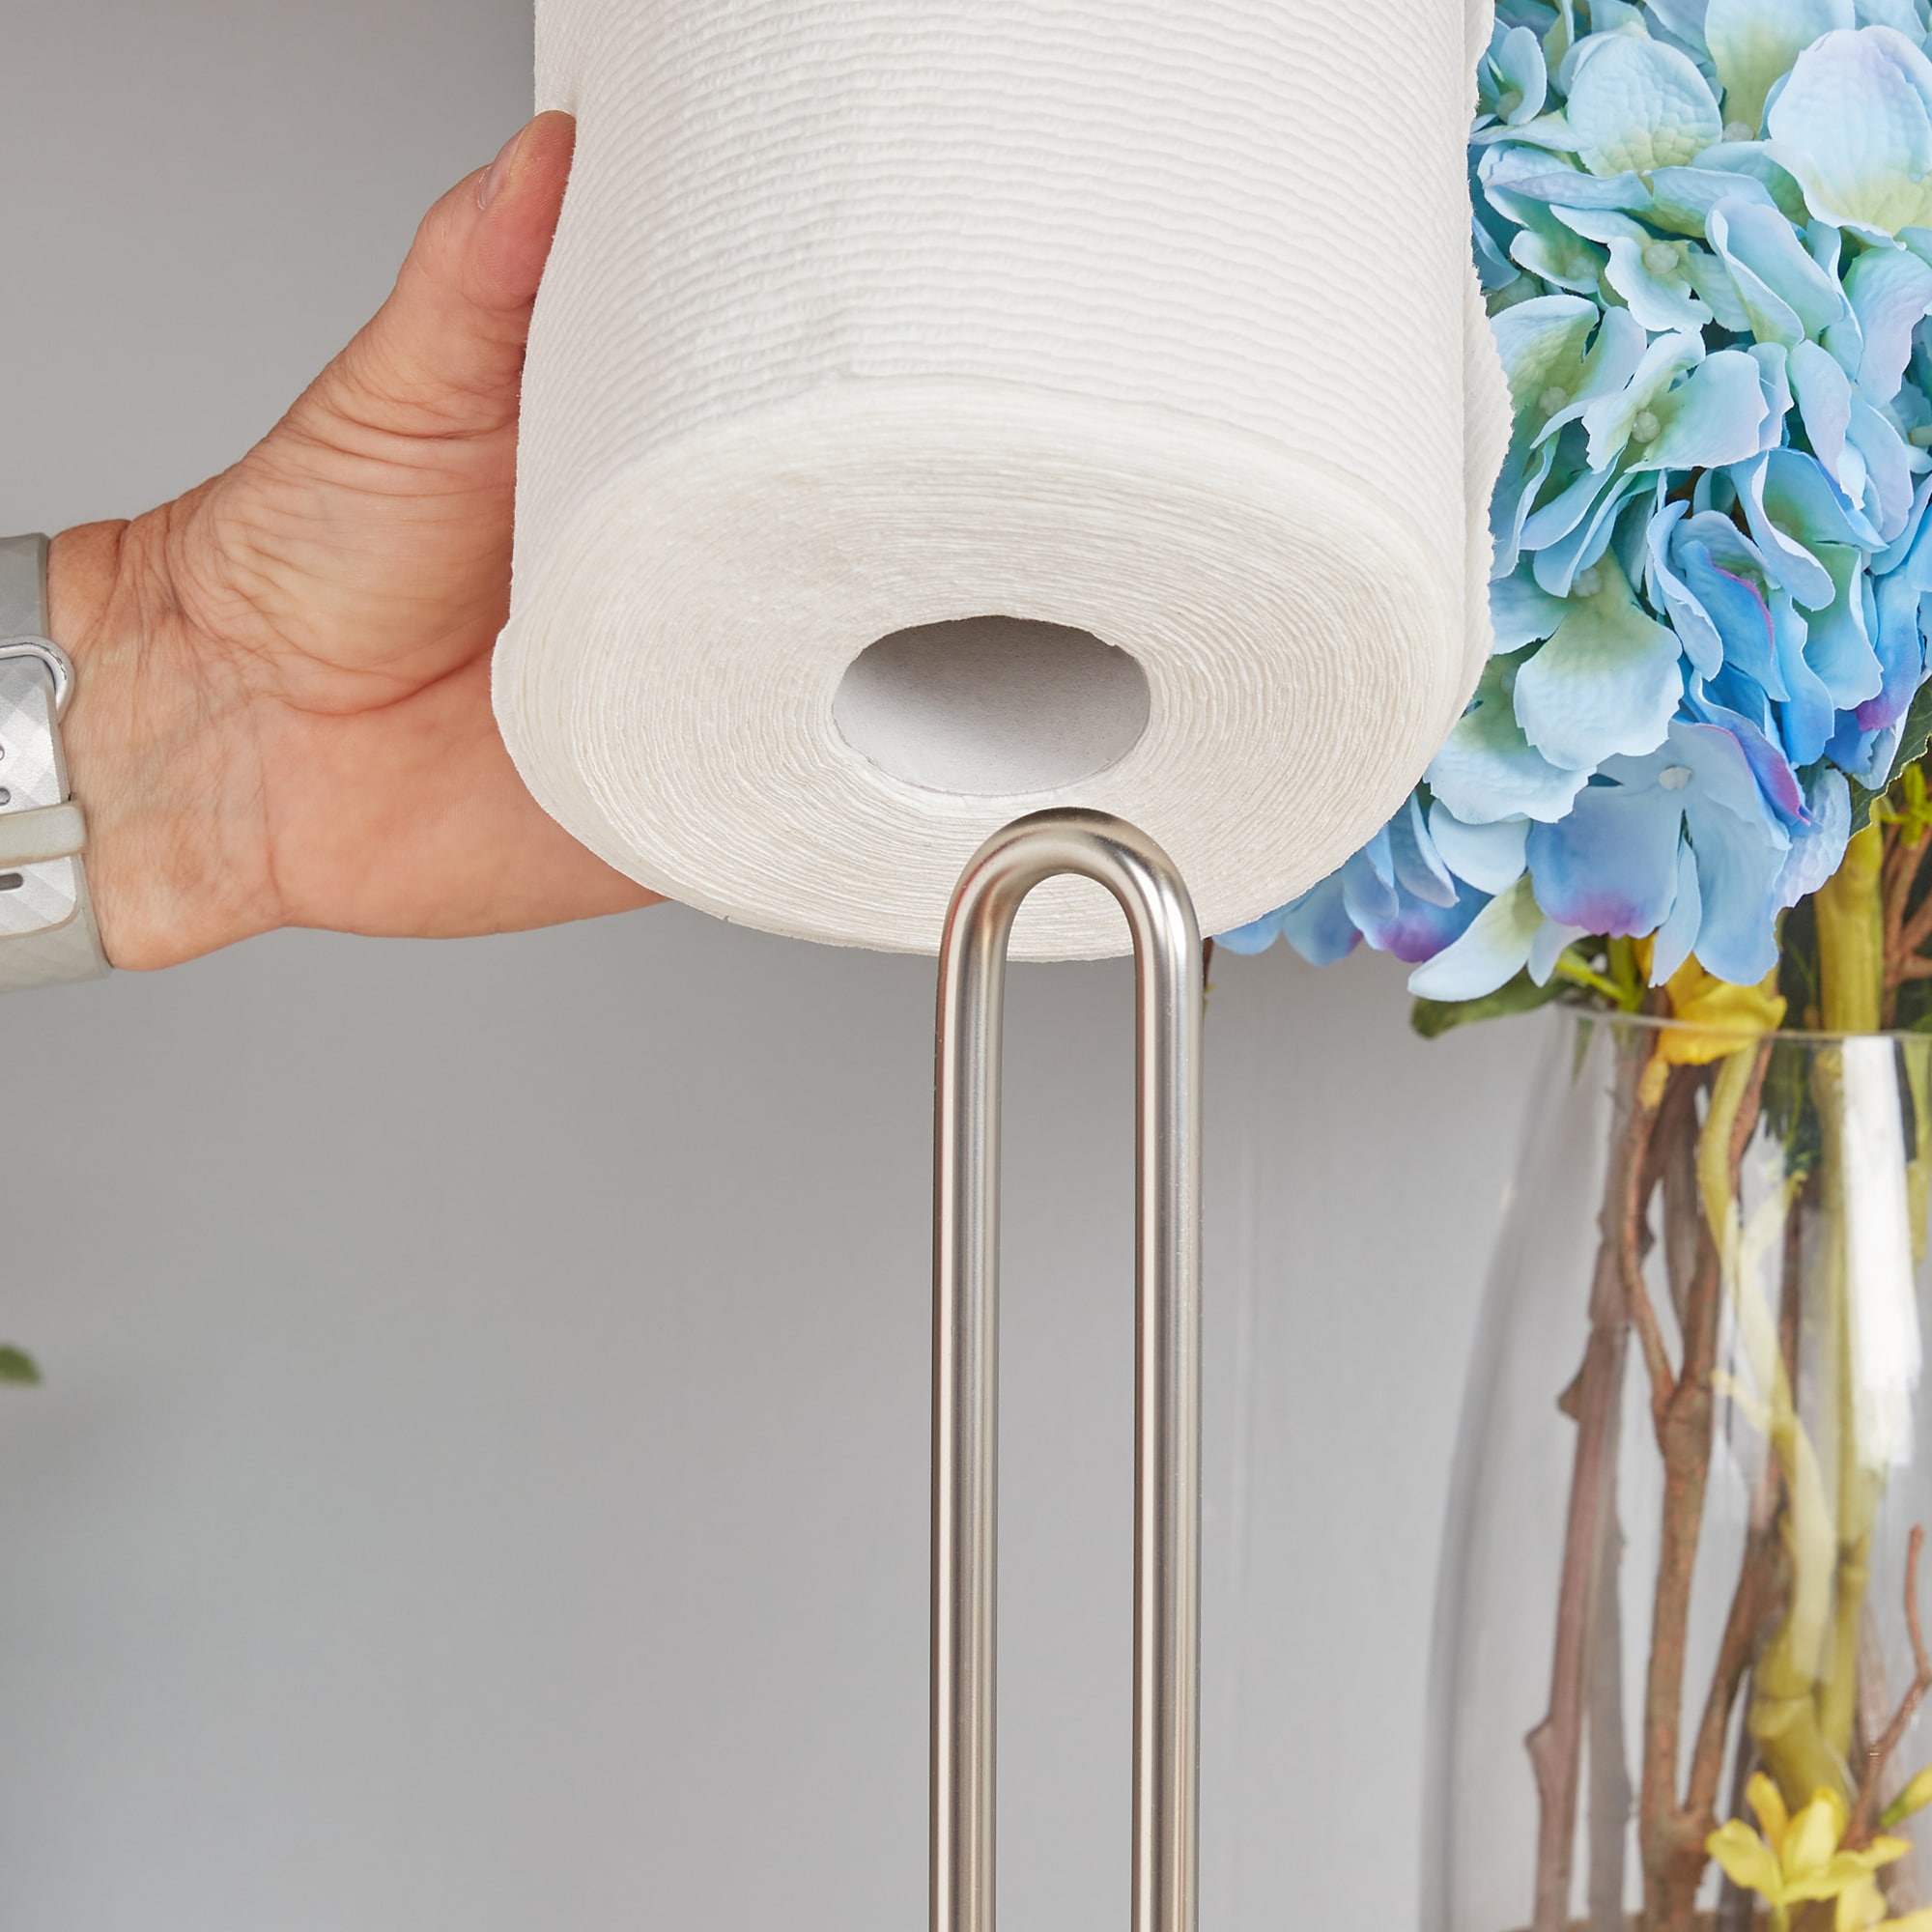 Fancy Style paper towel holder - under cabinet or wall mount